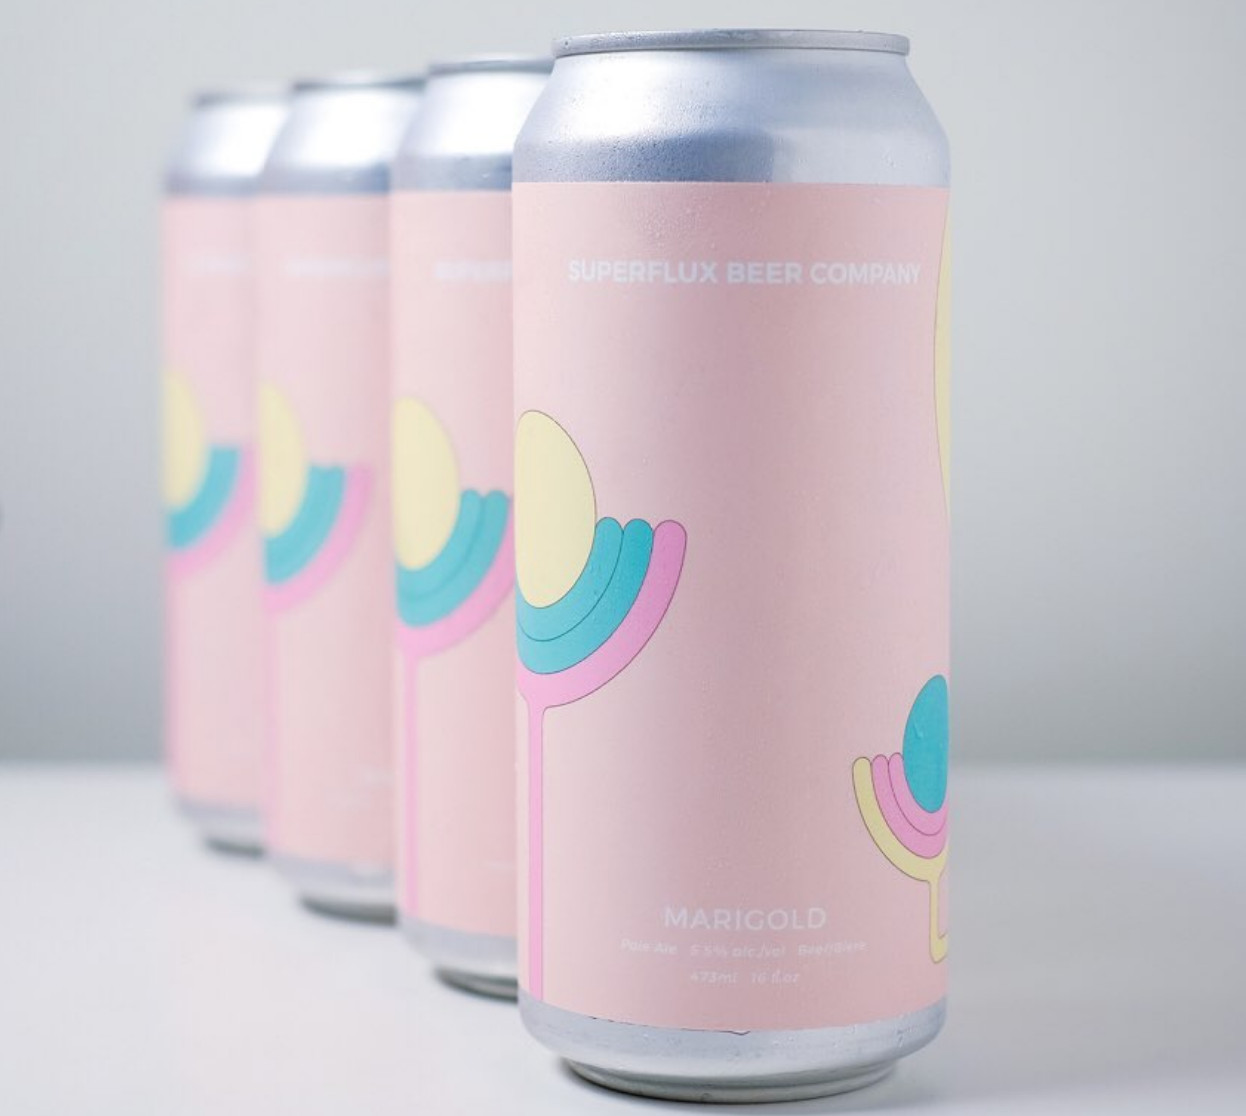 Marigold by Superflux Beer Co.